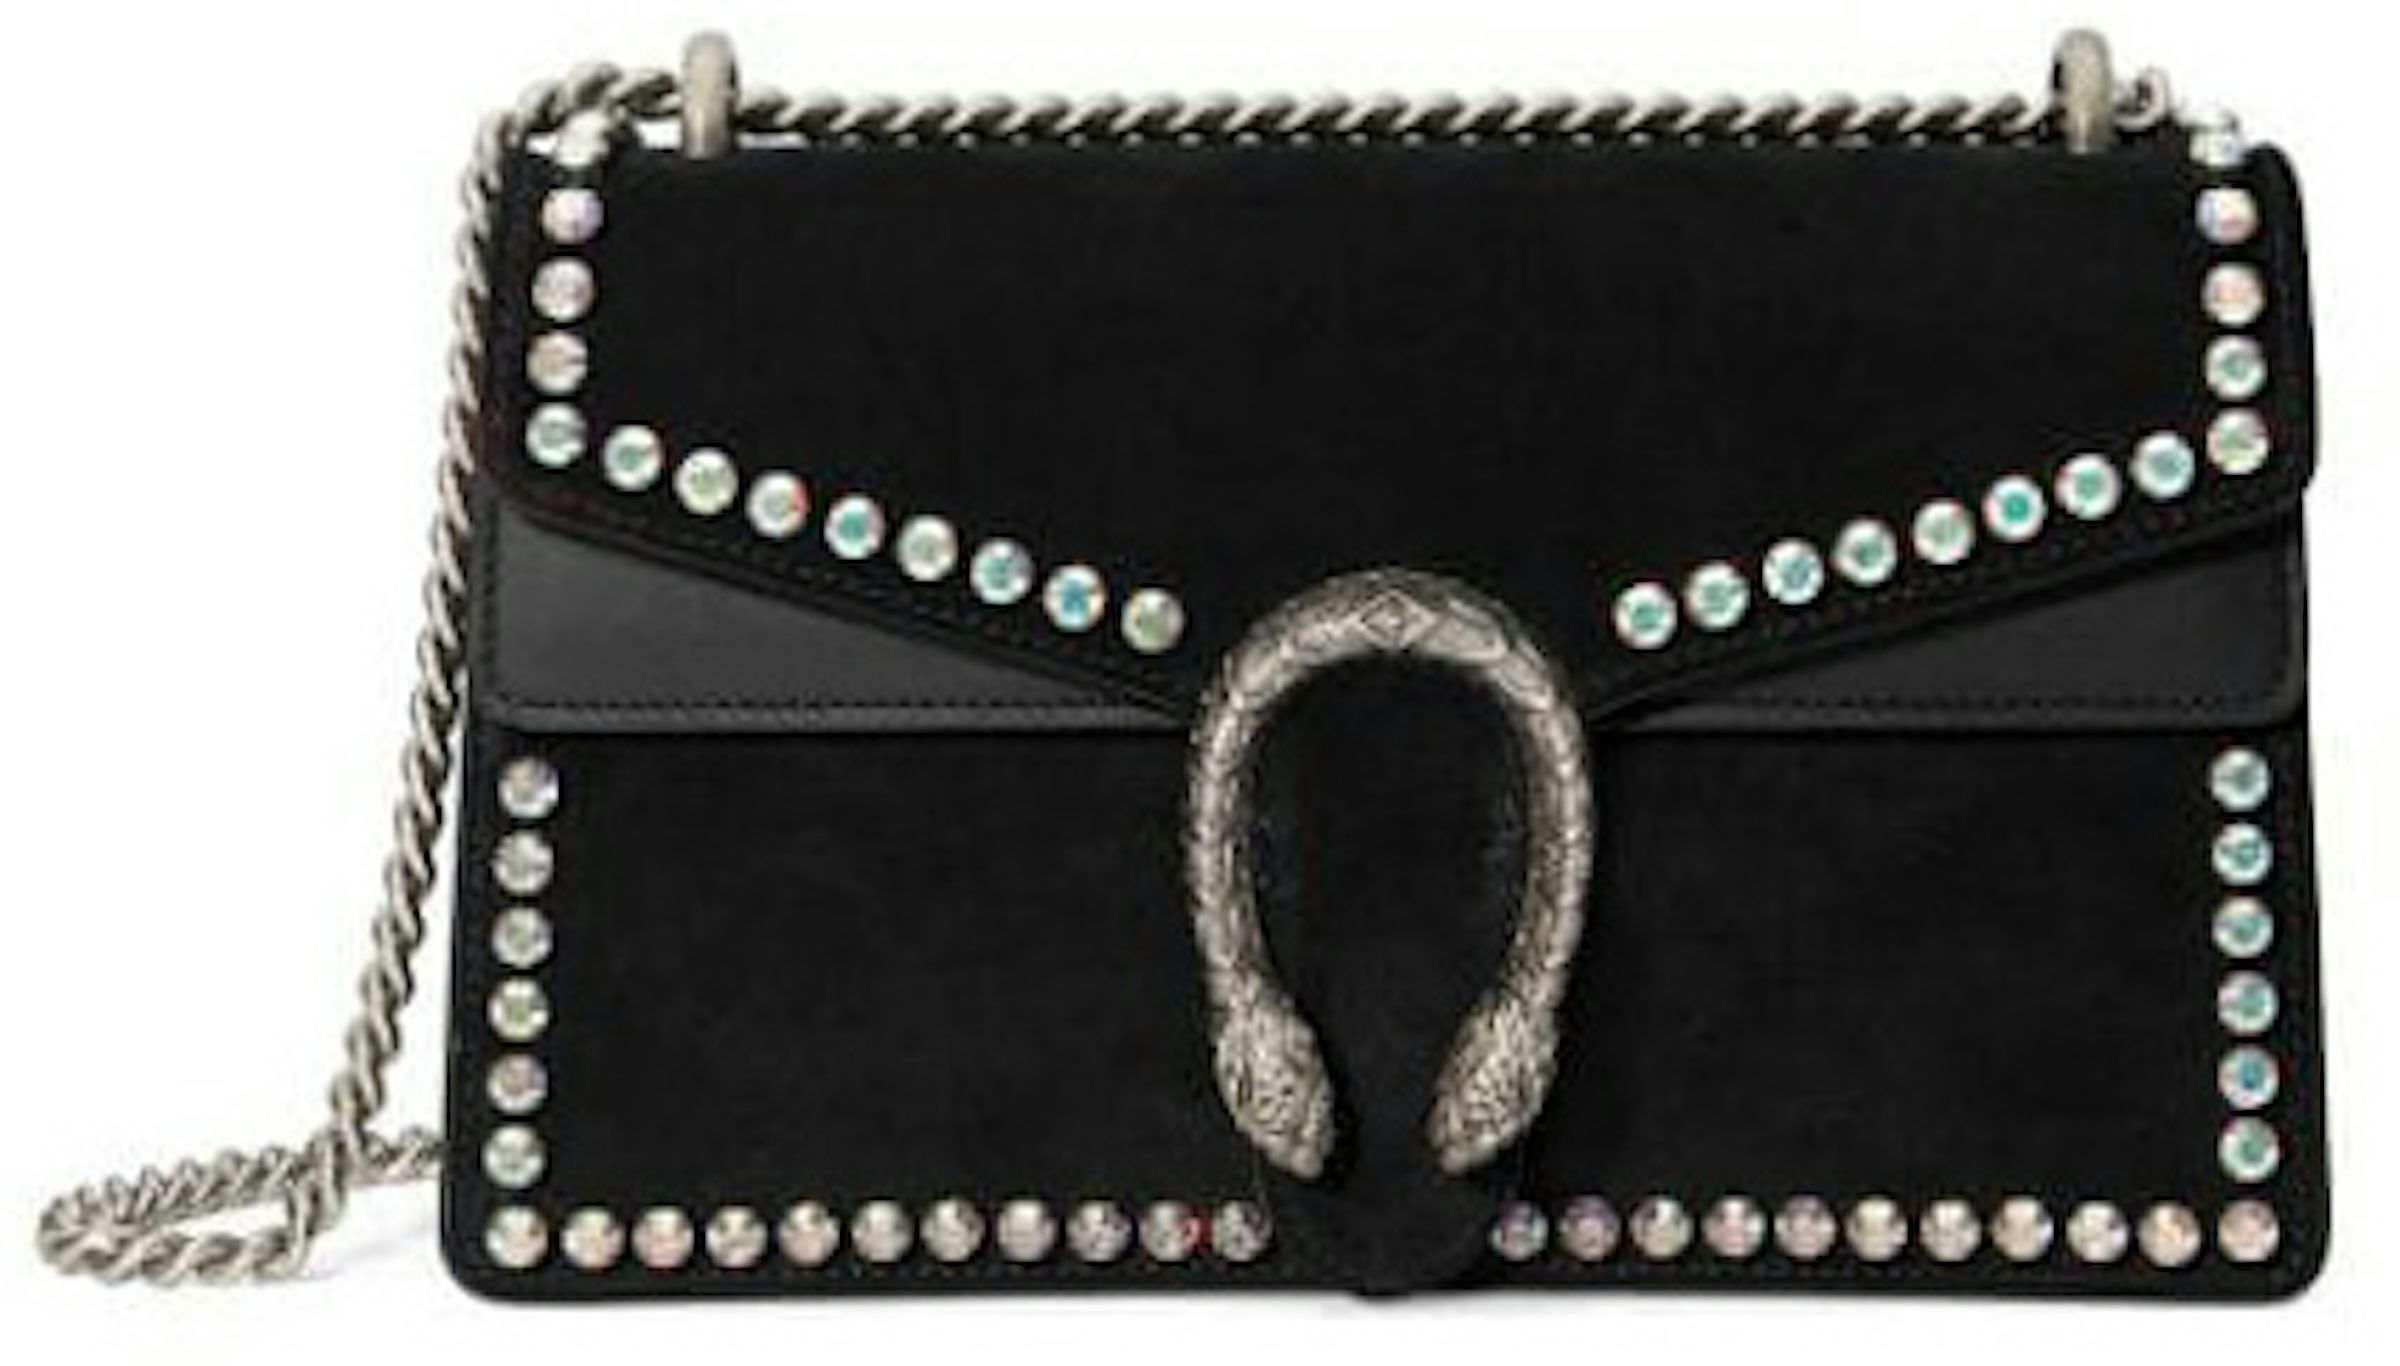 GUCCI Dionysus Wallet on Chain with Crystals  Gucci dionysus wallet on  chain, Gucci dionysus, Gucci